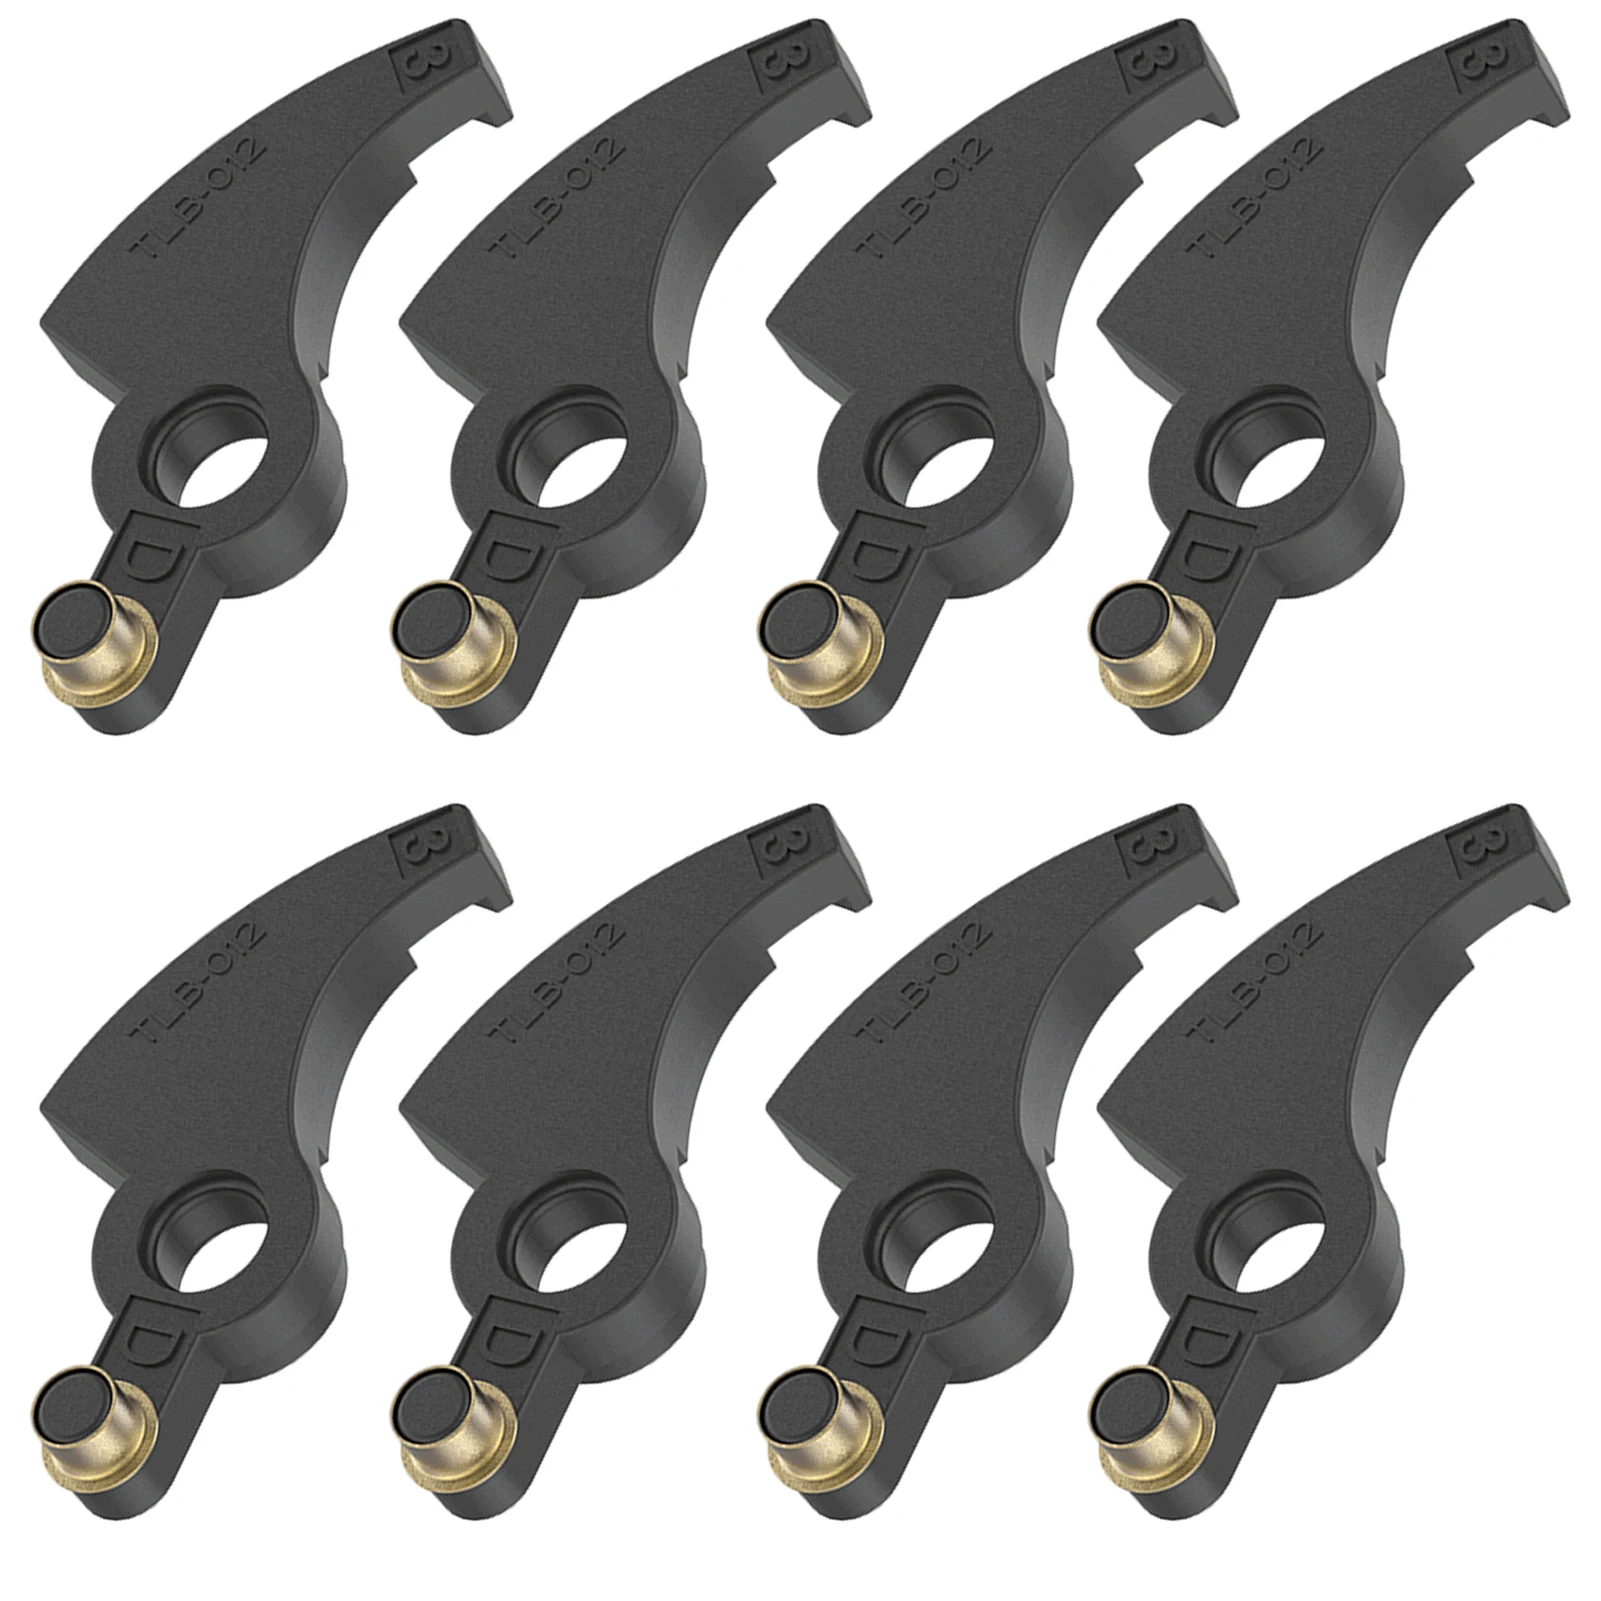 

8pcs Durable Part Replacement Assembly Accessories Trimmer Lever Black Spool Ratchet Fast String Garden Home Small Farm